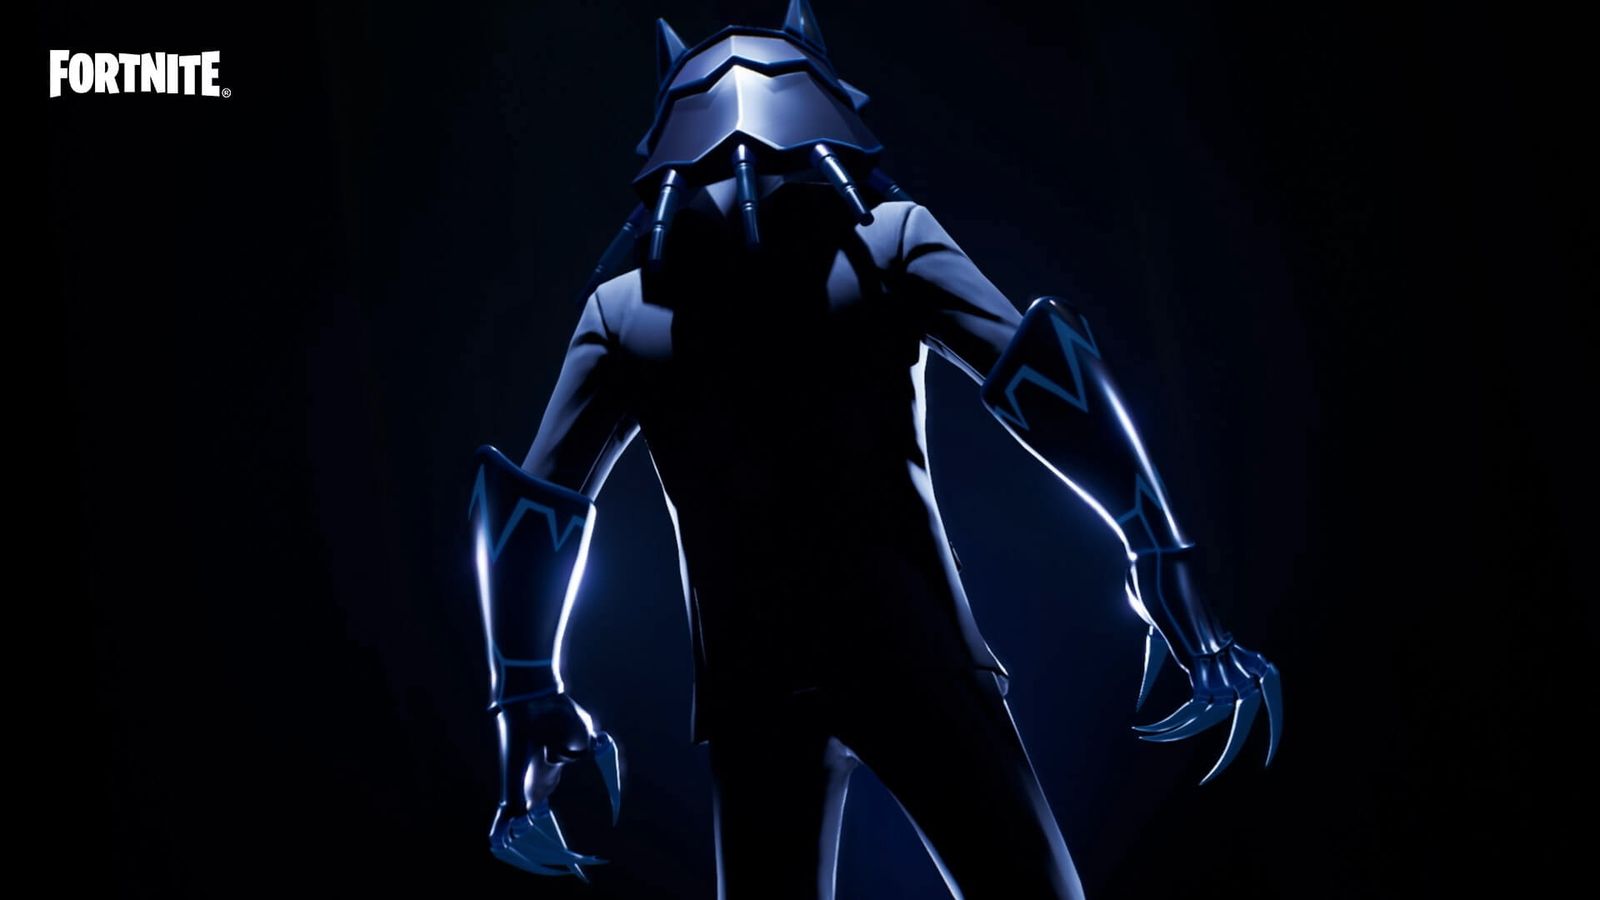 Image of a Fortnite character using the Howler Claws.